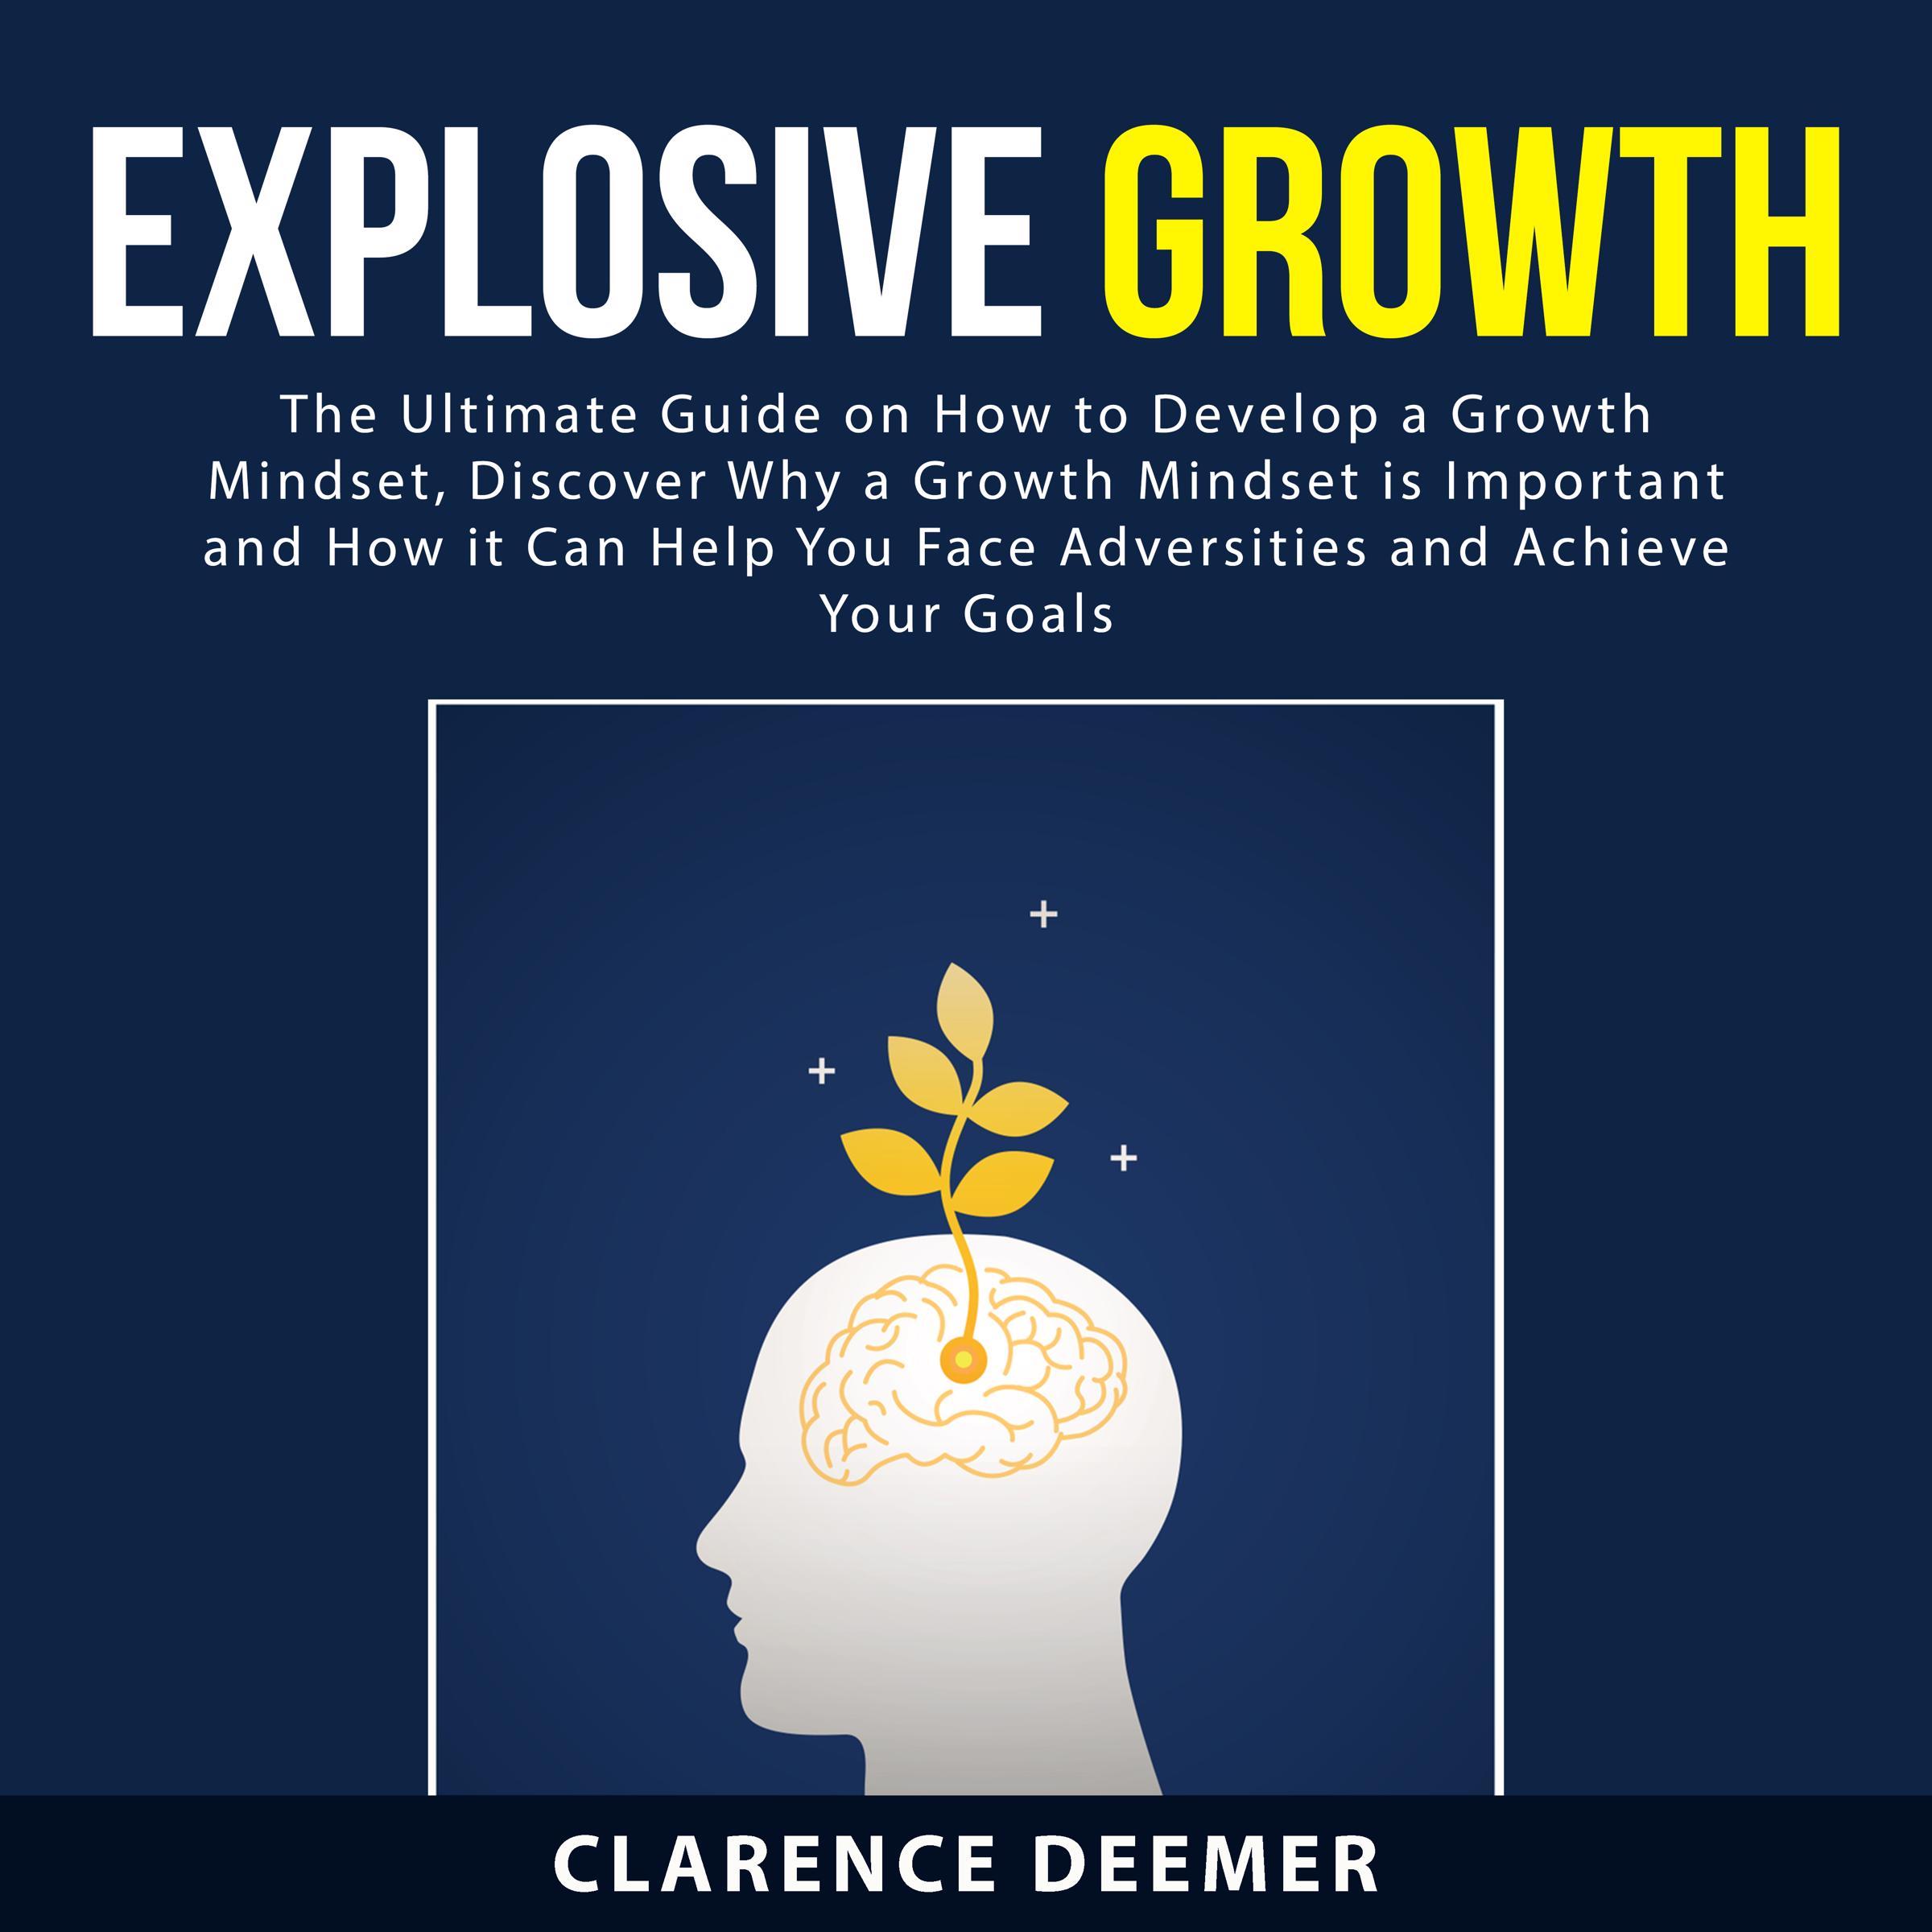 Explosive Growth: The Ultimate Guide on How to Develop a Growth Mindset, Discover Why a Growth Mindset is Important and How it Can Help You Face Adversities and Achieve Your Goals